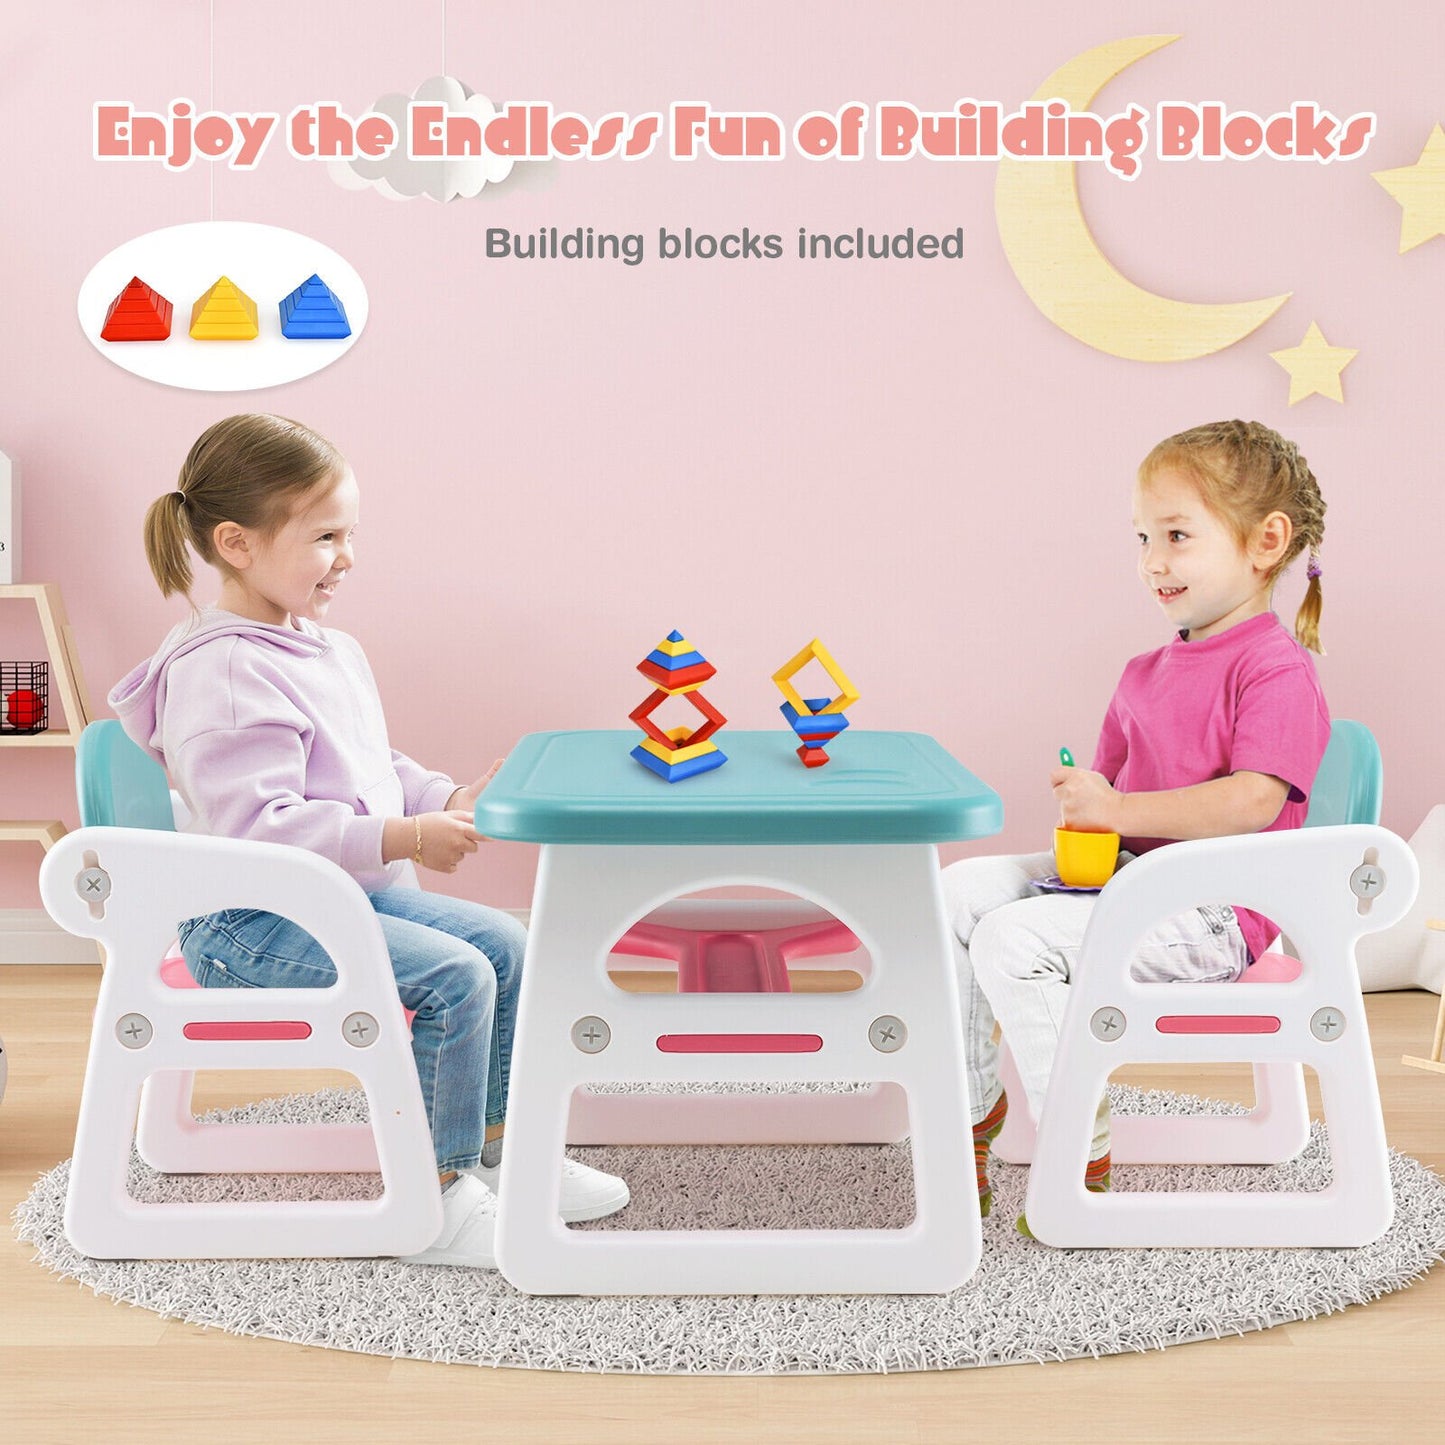 Kids Table and Chair Set with Building Blocks, Pink & Blue